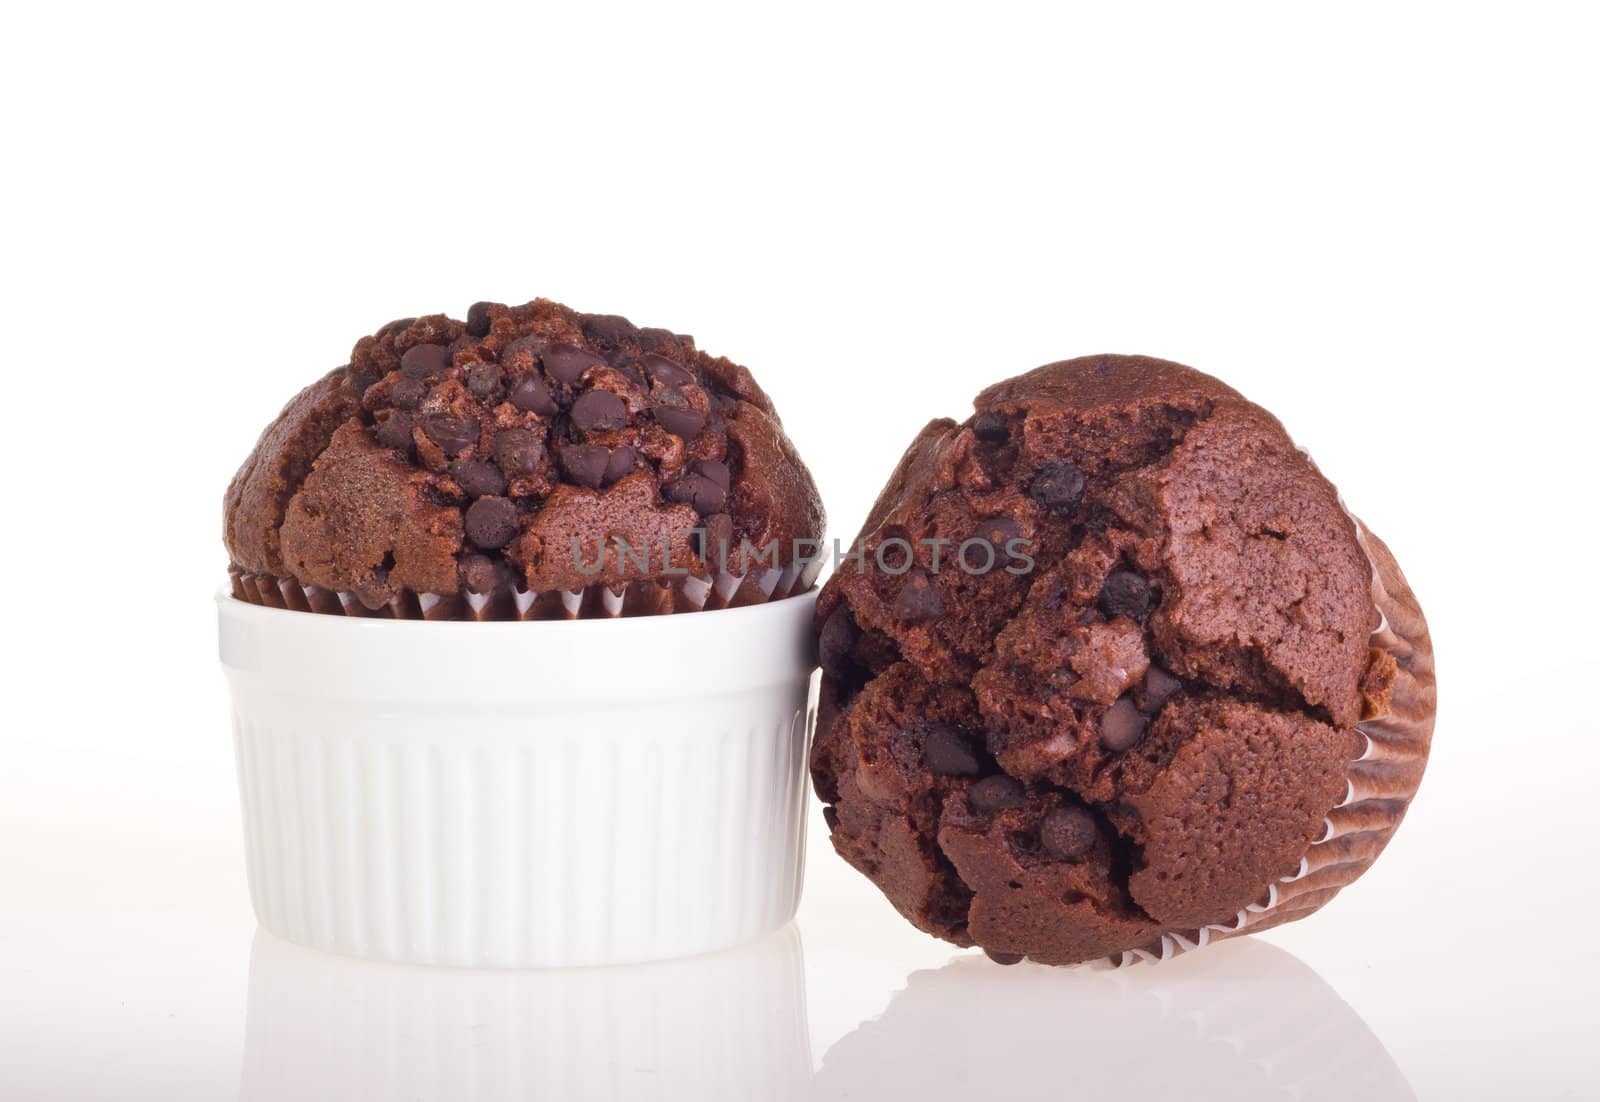 Chocolate muffin isolated on white background.